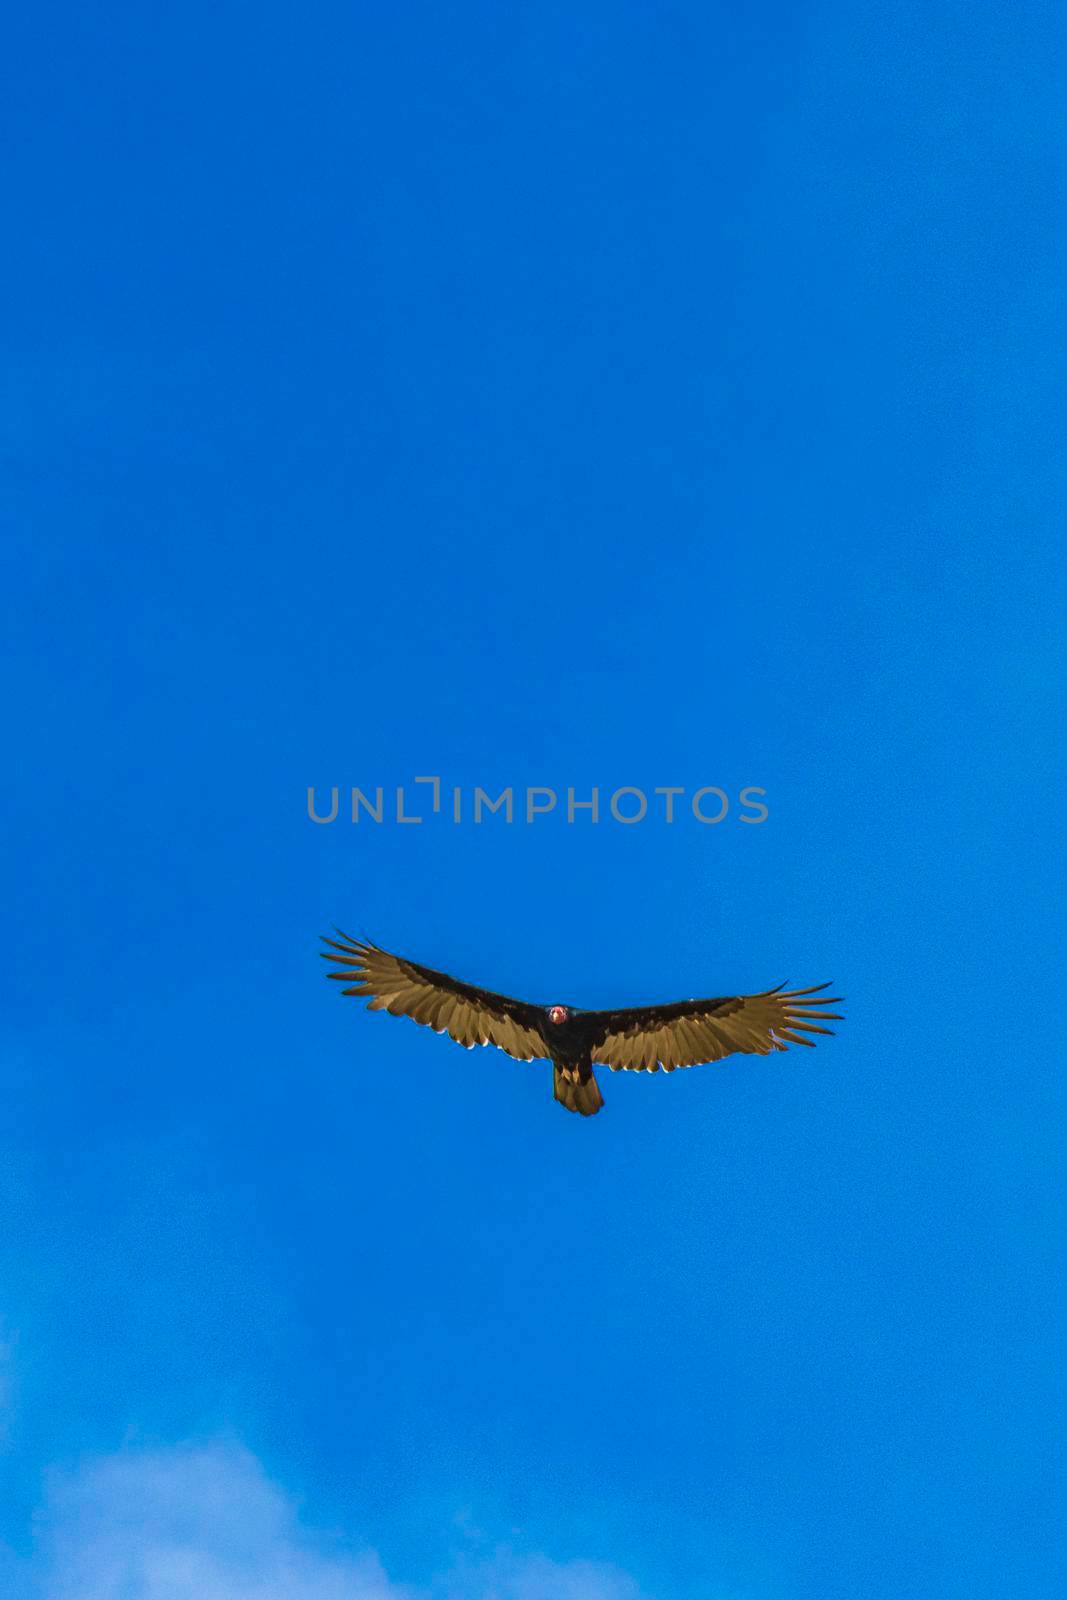 Tropical Black Turkey Vulture Cathartes aura aura flies lonely with blue cloudy sky background in Playa del Carmen Quintana Roo Mexico.